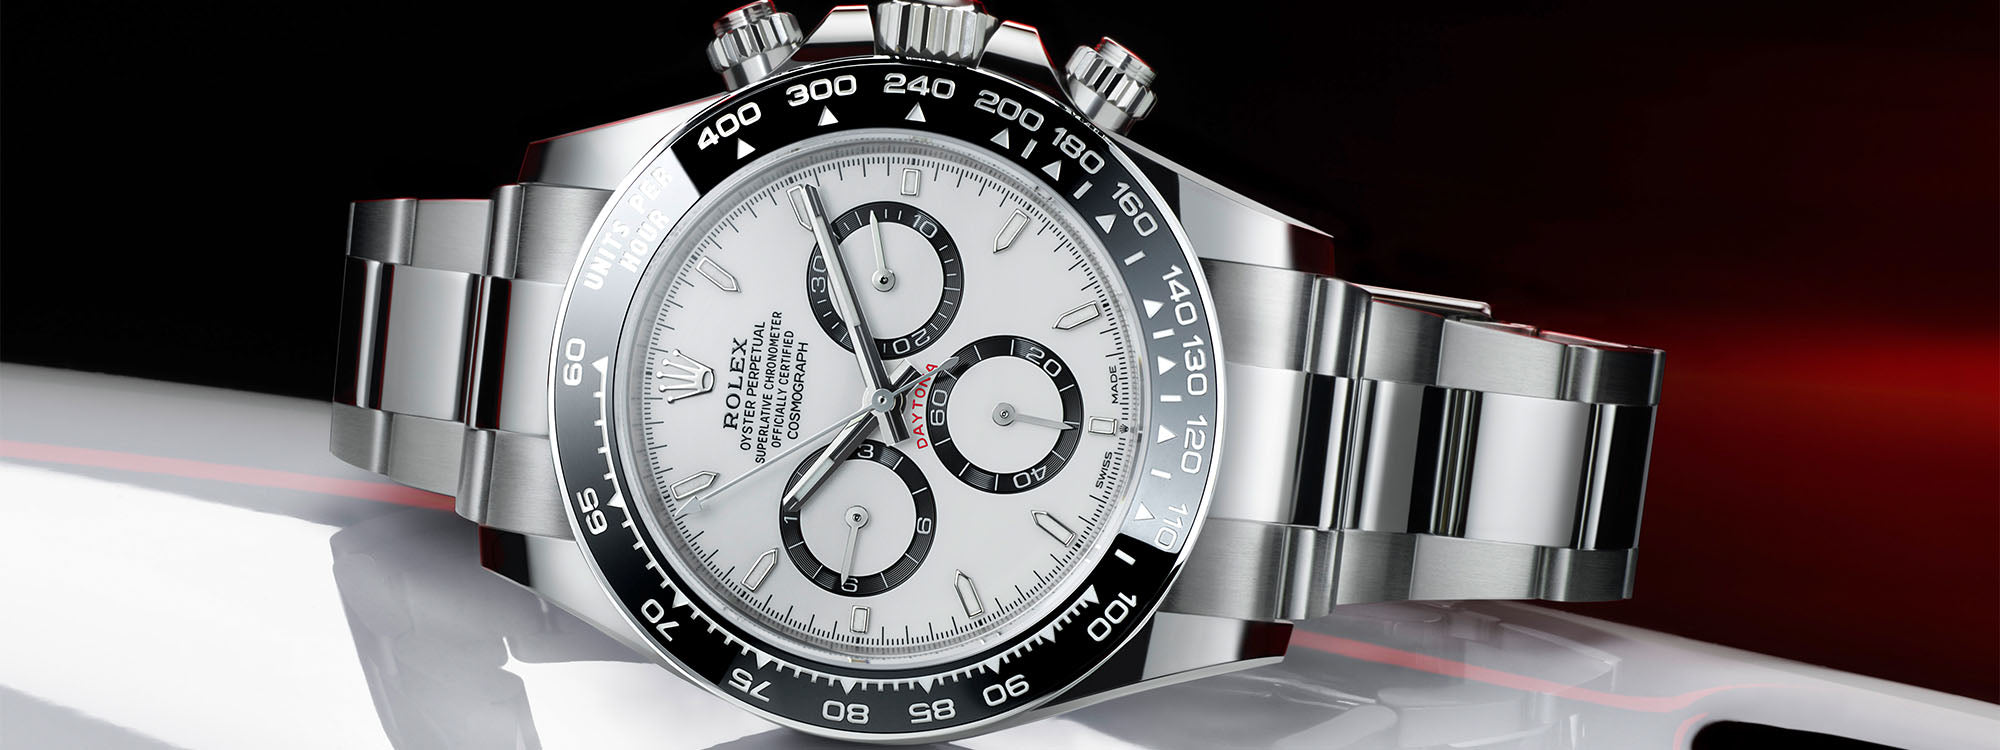 Rolex Daytona: A Comprehensive Guide to the Iconic Racing Chronograph